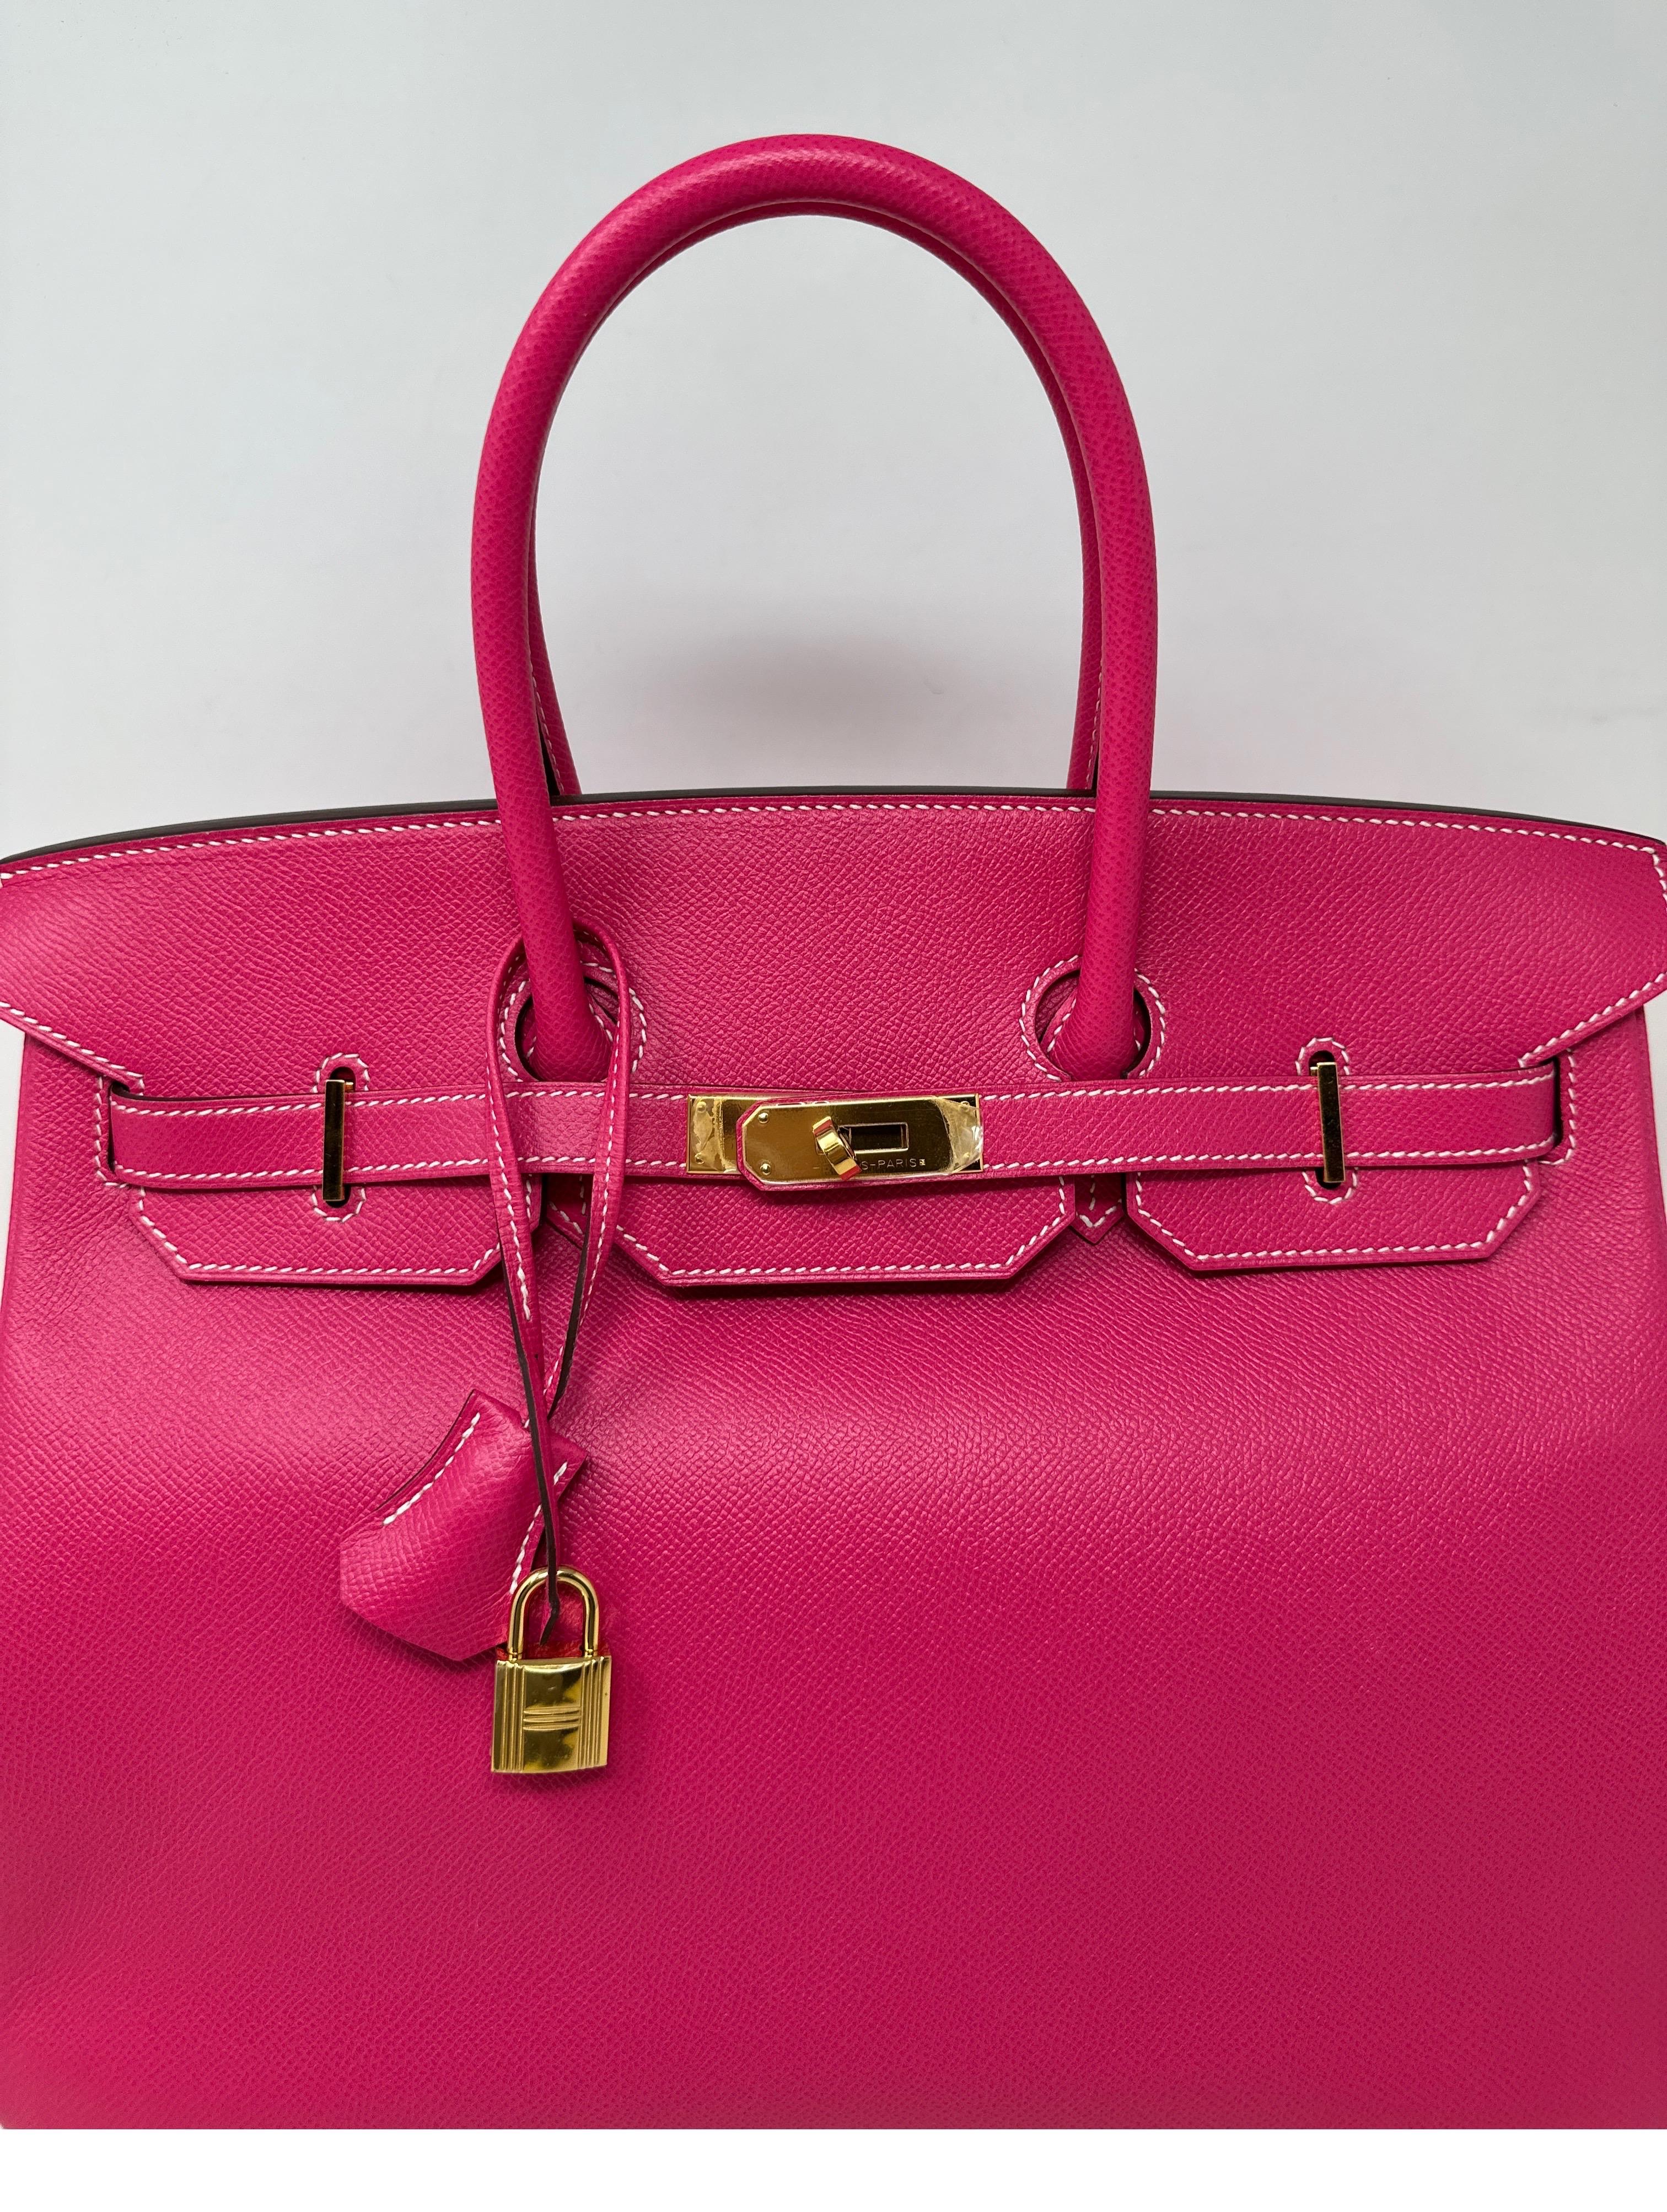 Hermes Rose Tyrien 35 Birkin Bag. Stunning hot pink color Birkin. Gold hardware. Excellent condition. Hard to find combination. Interior clean. Includes clochette, lock, keys, and dust bag. Guaranteed authentic. 